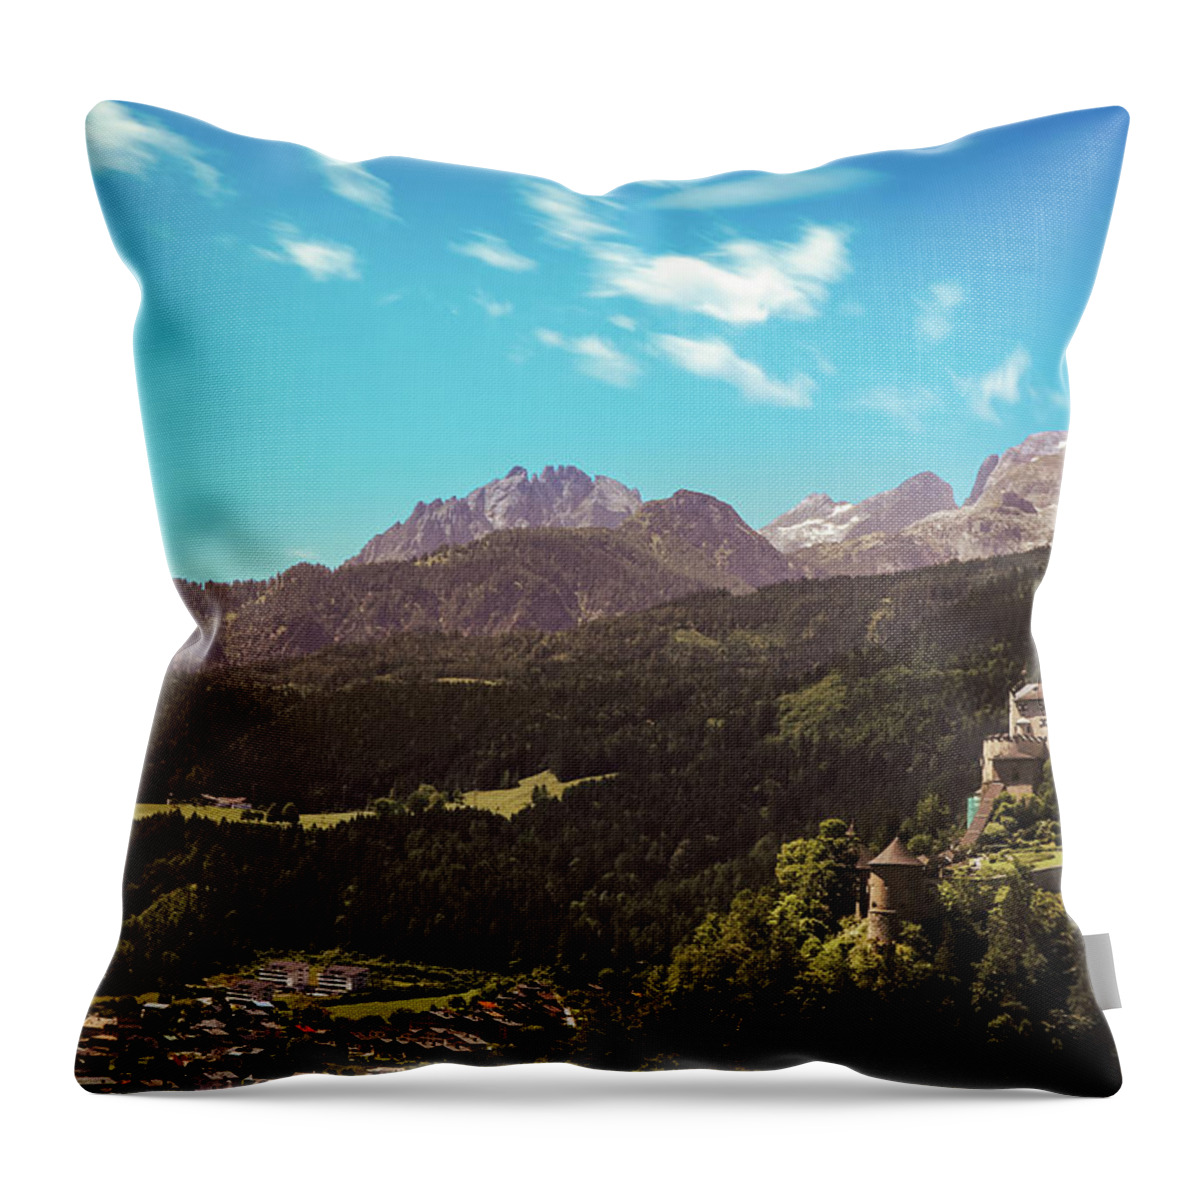 Reconstruction Throw Pillow featuring the photograph Medieval Hohenwerfen Castle by Vaclav Sonnek